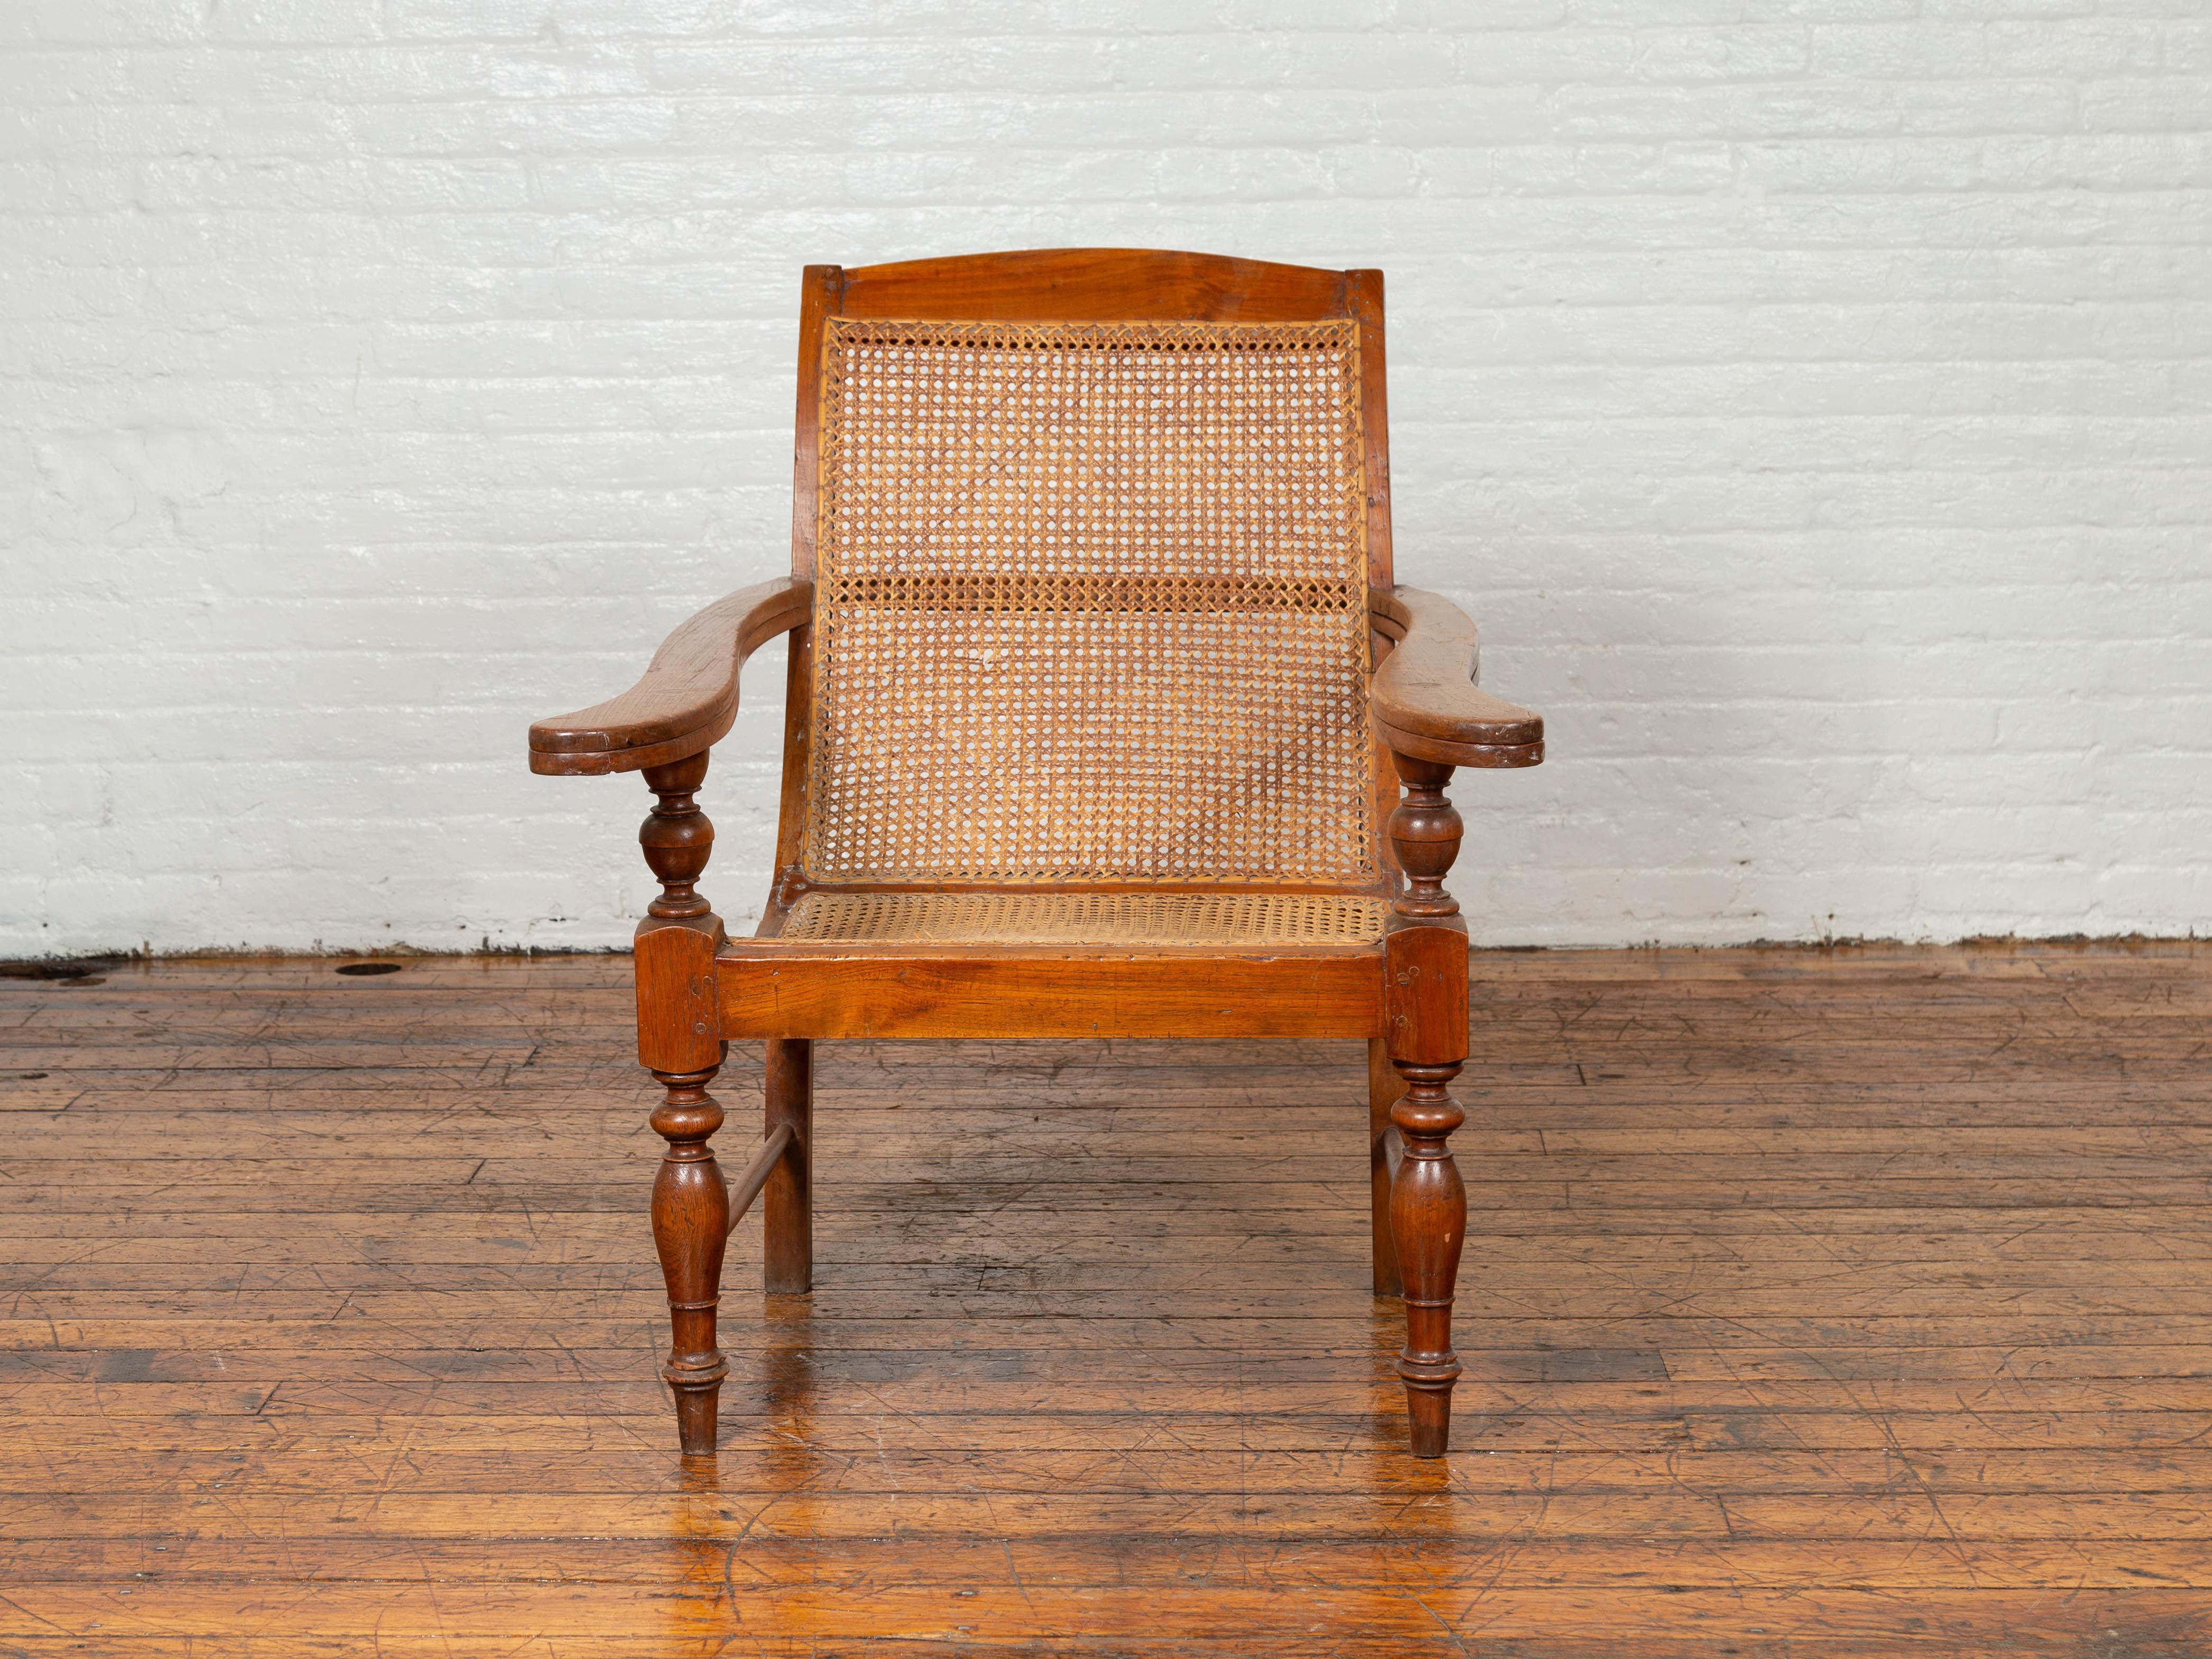 20th Century Dutch Colonial Vintage Teak Plantation Lounge Chair with Curving Seat and Rattan